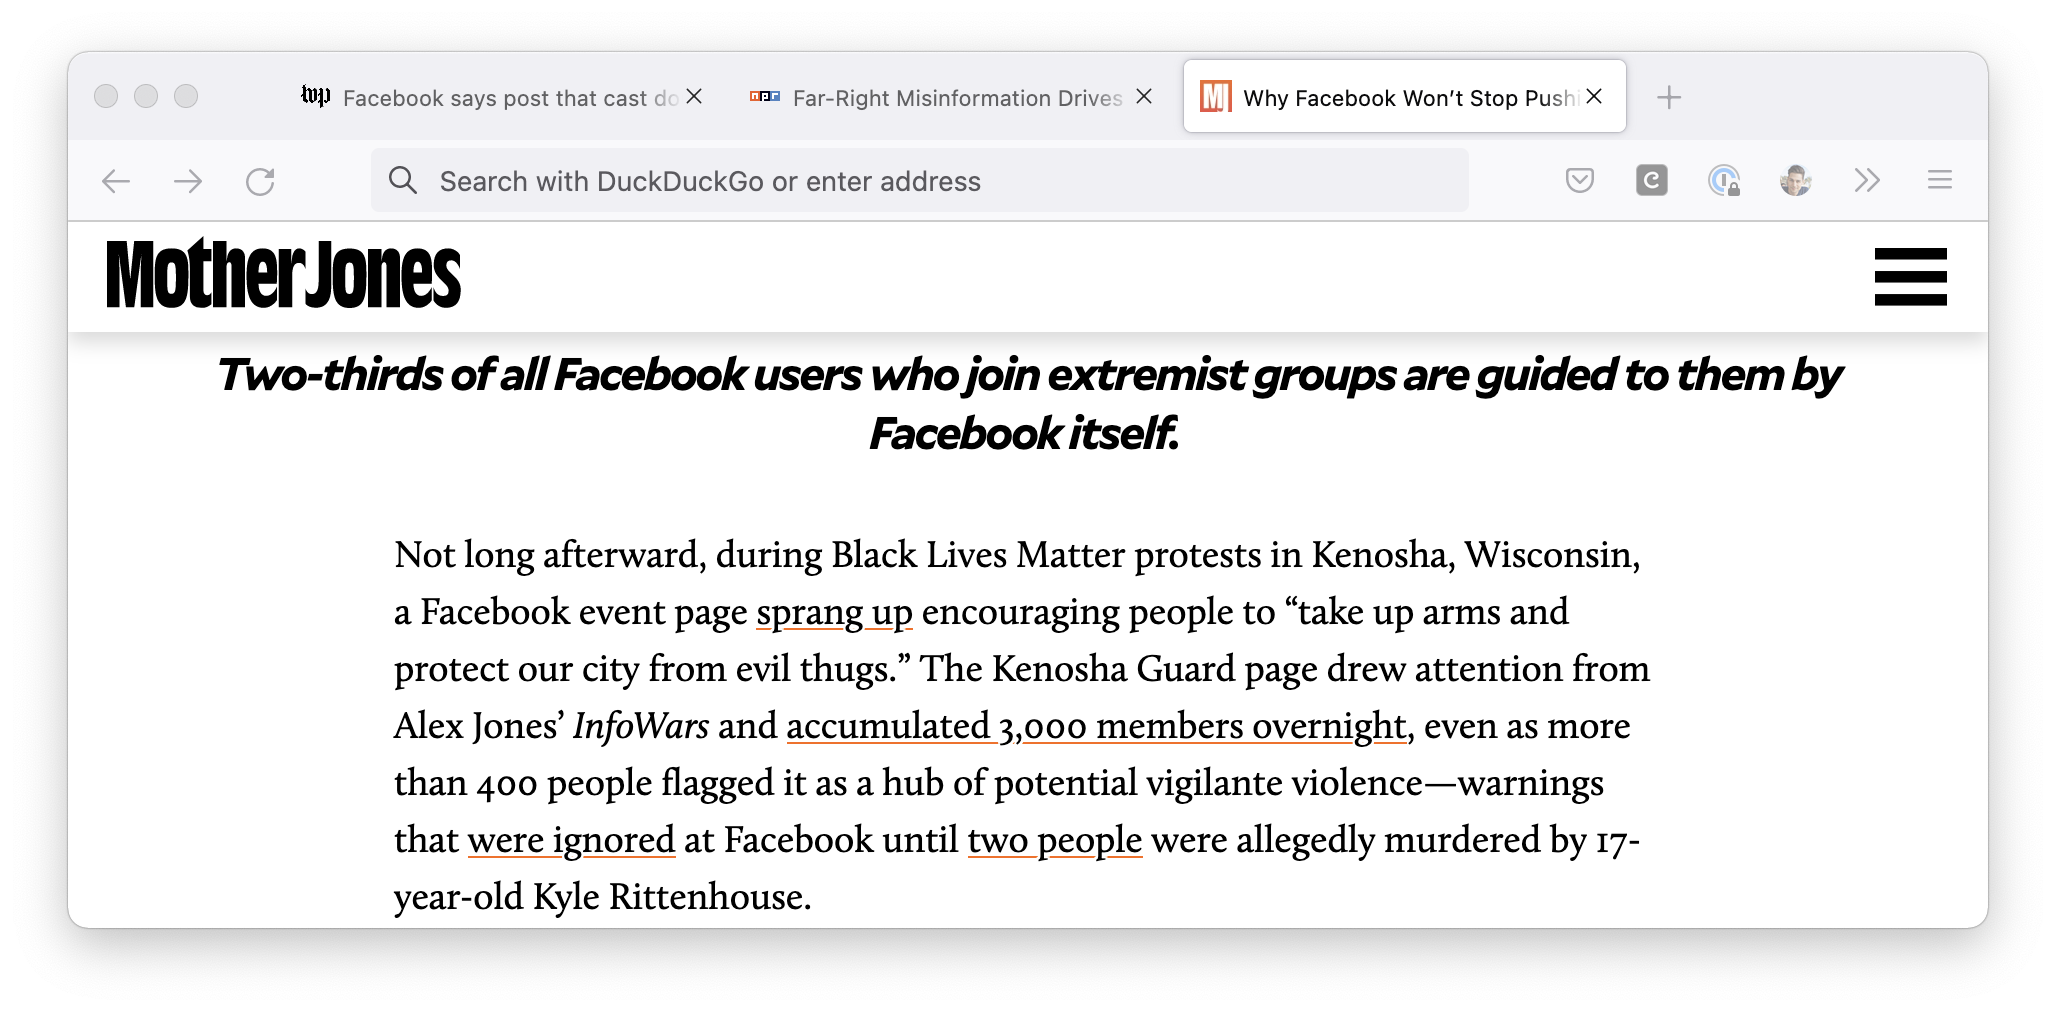 Screenshot of Mother Jones. Text: Two-thirds of all Facebook users who join extremist groups are guided to them by Facebook itself.